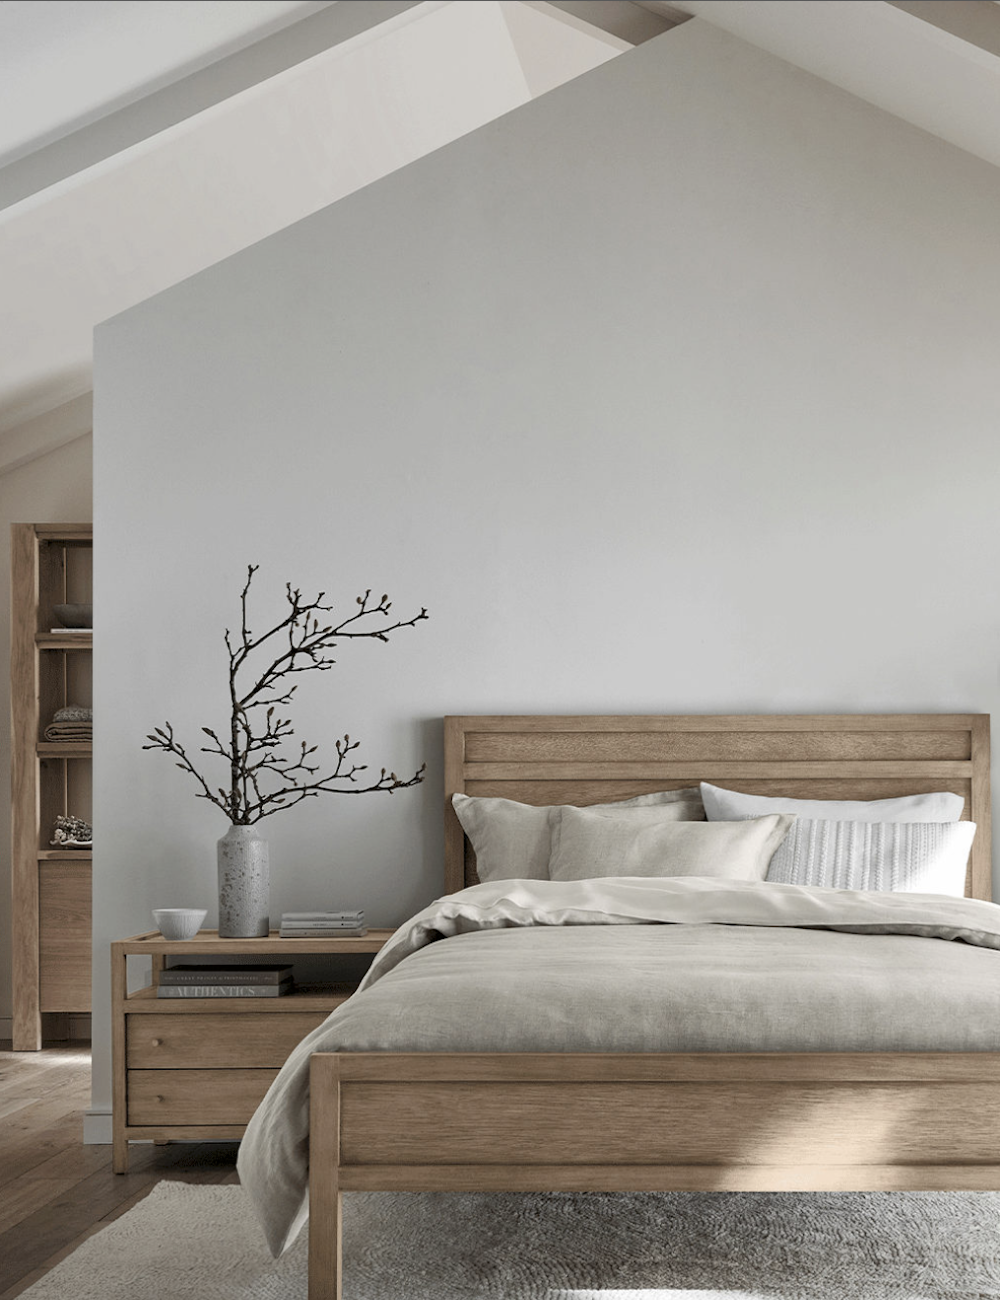 image of a wooden bed and nightstand in a calming neutral room with linen sheets